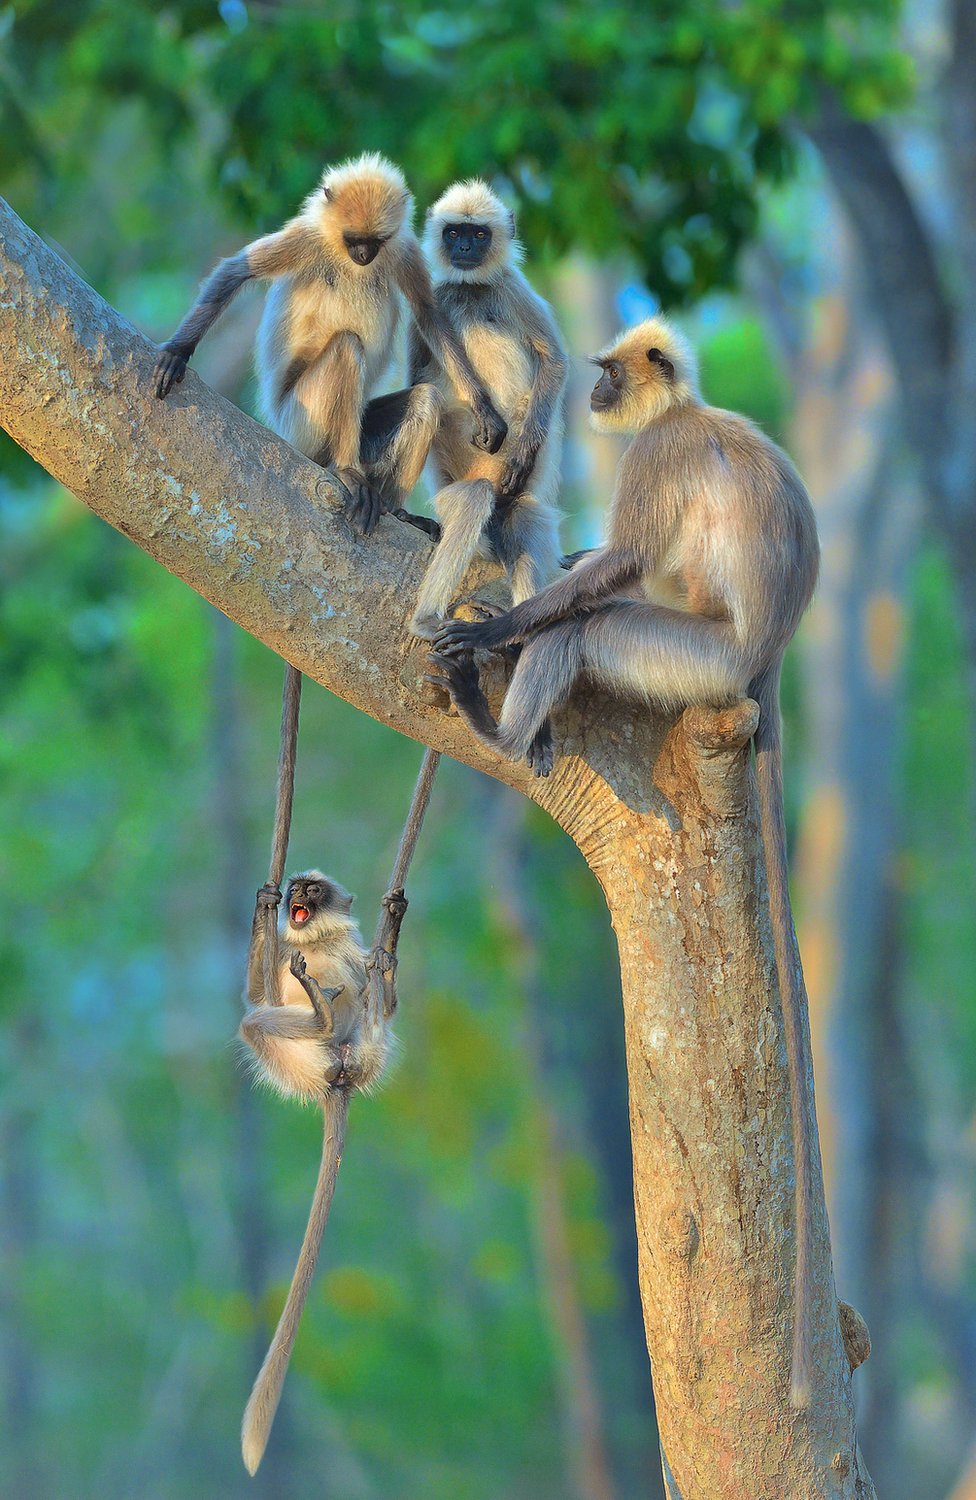 A monkey swinging on the tails of two other monkeys